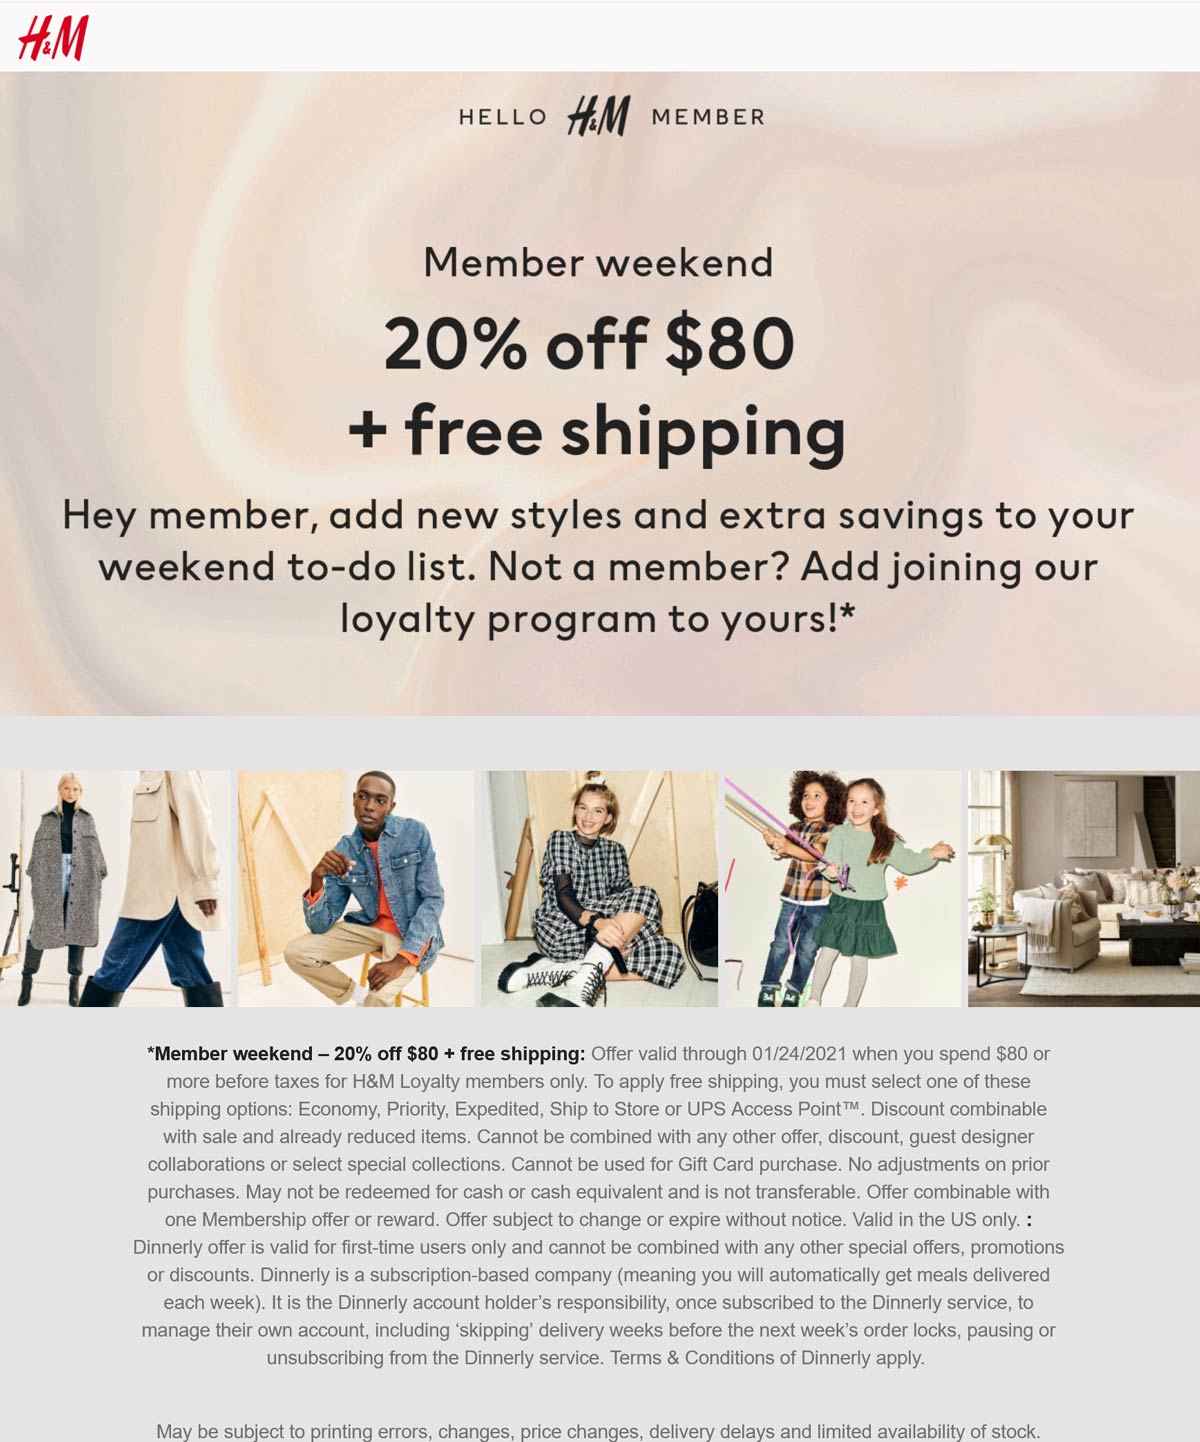 H&M stores Coupon  20% off $80 + free shipping logged in at H&M #hm 